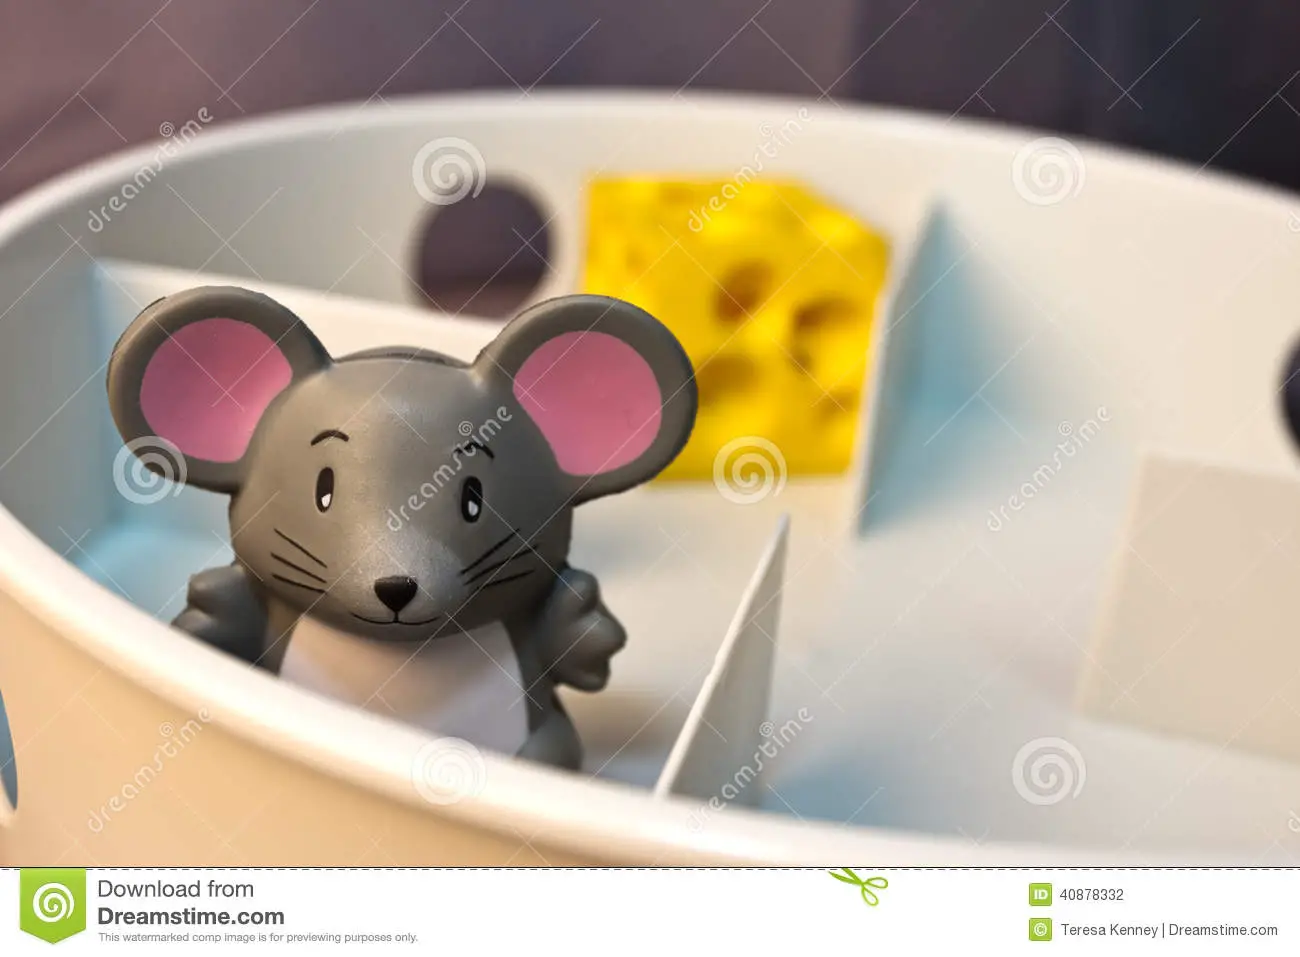 Wheres the cheese? stock photo. Image of solving, mouse